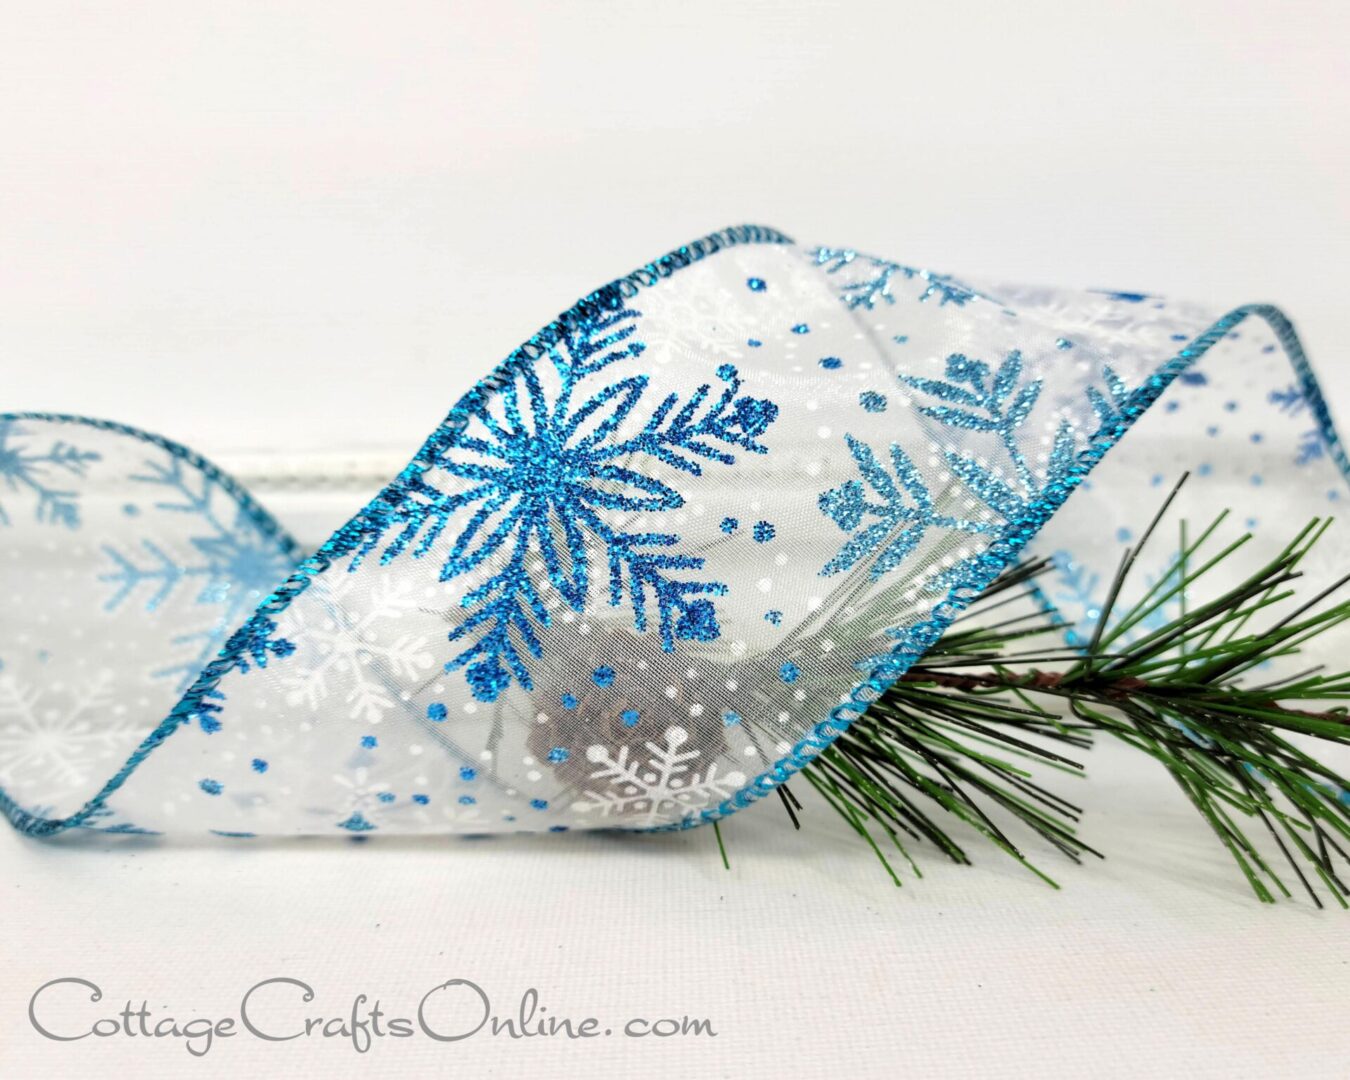 Blue glitter snowflakes on white sheer 2.5" wide wired ribbon from the Etsy shop of Cottage Crafts Online.